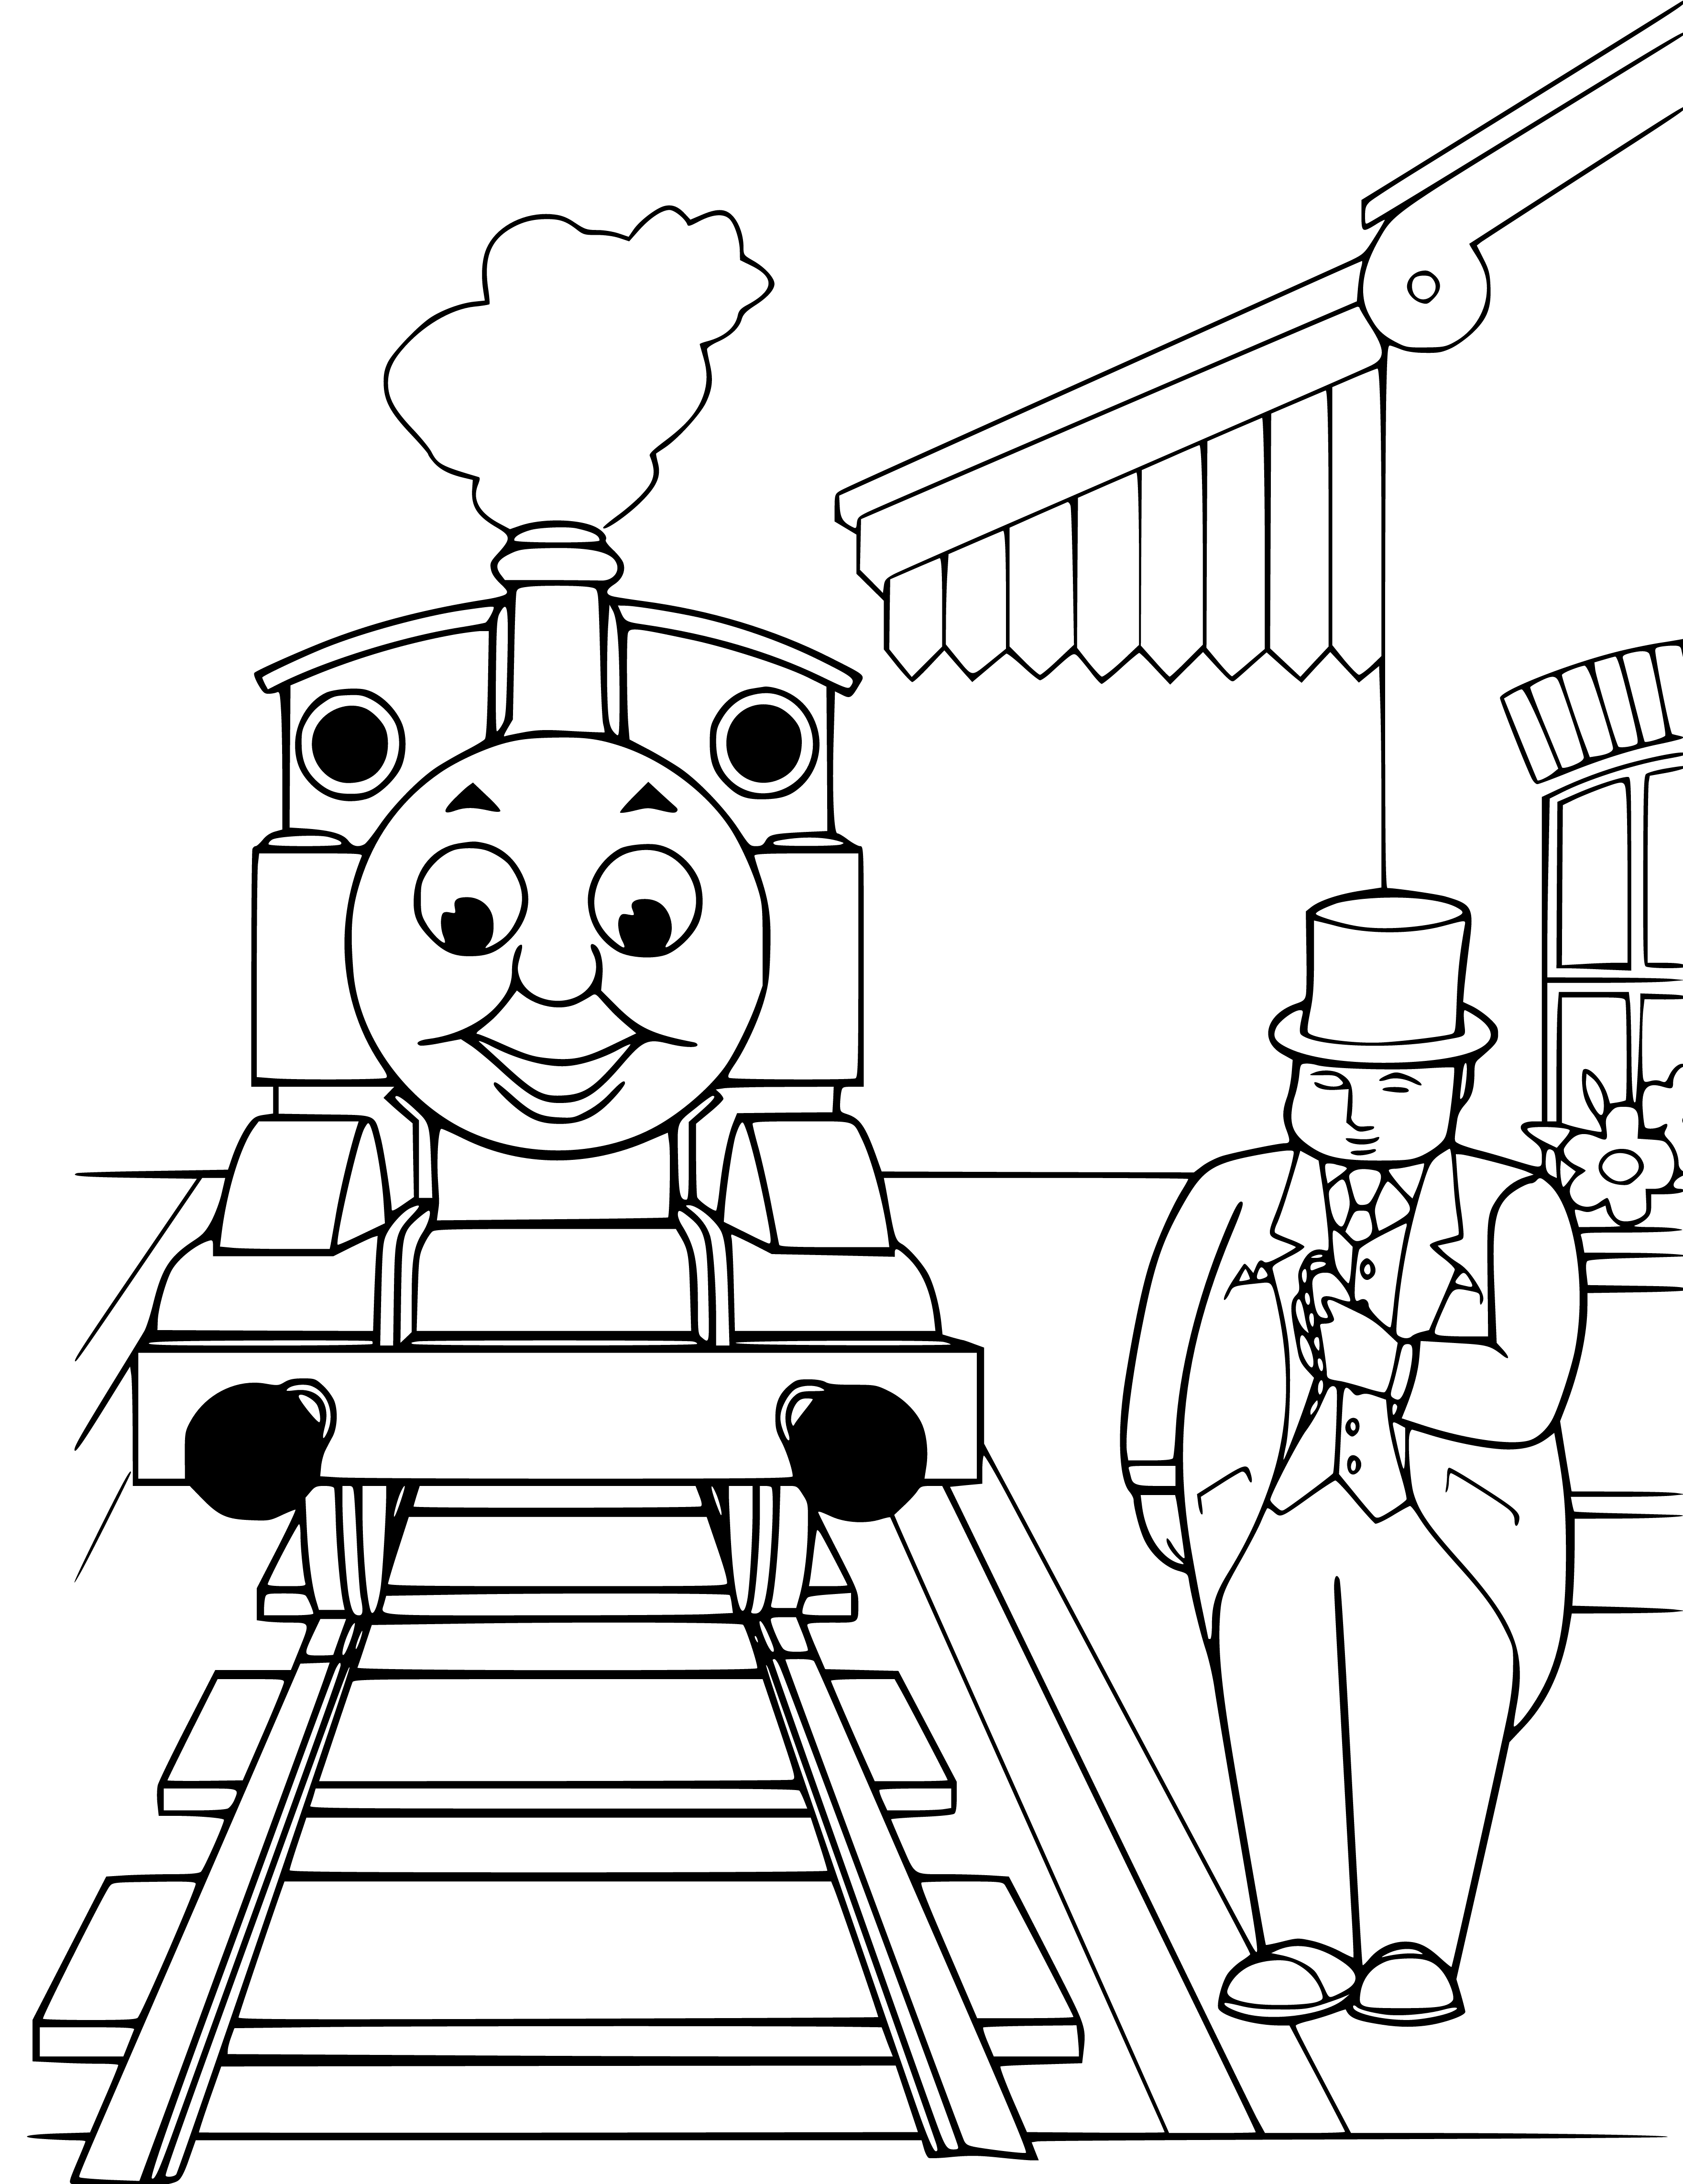 Thomas and Friends Coloring Pages - SheetalColor.com